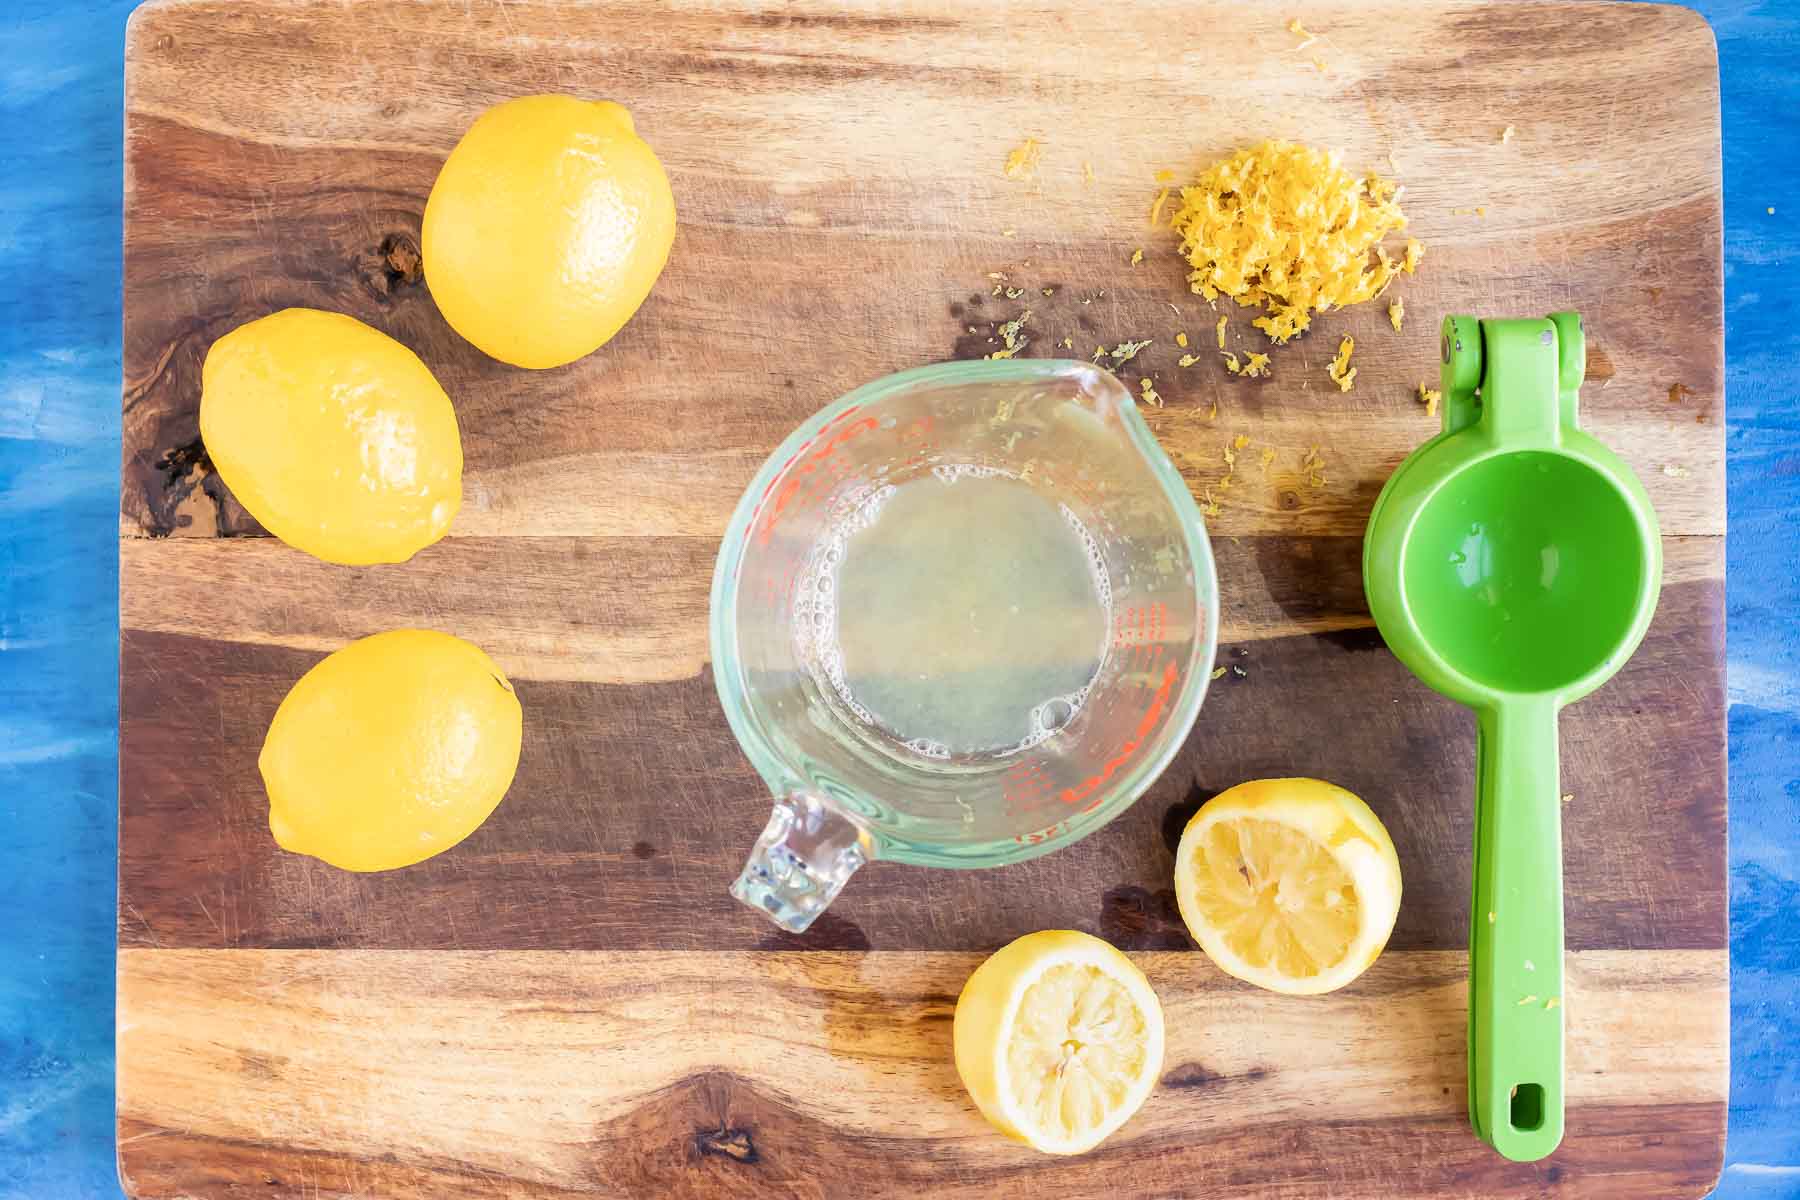 Lemons are juiced with a juicer.